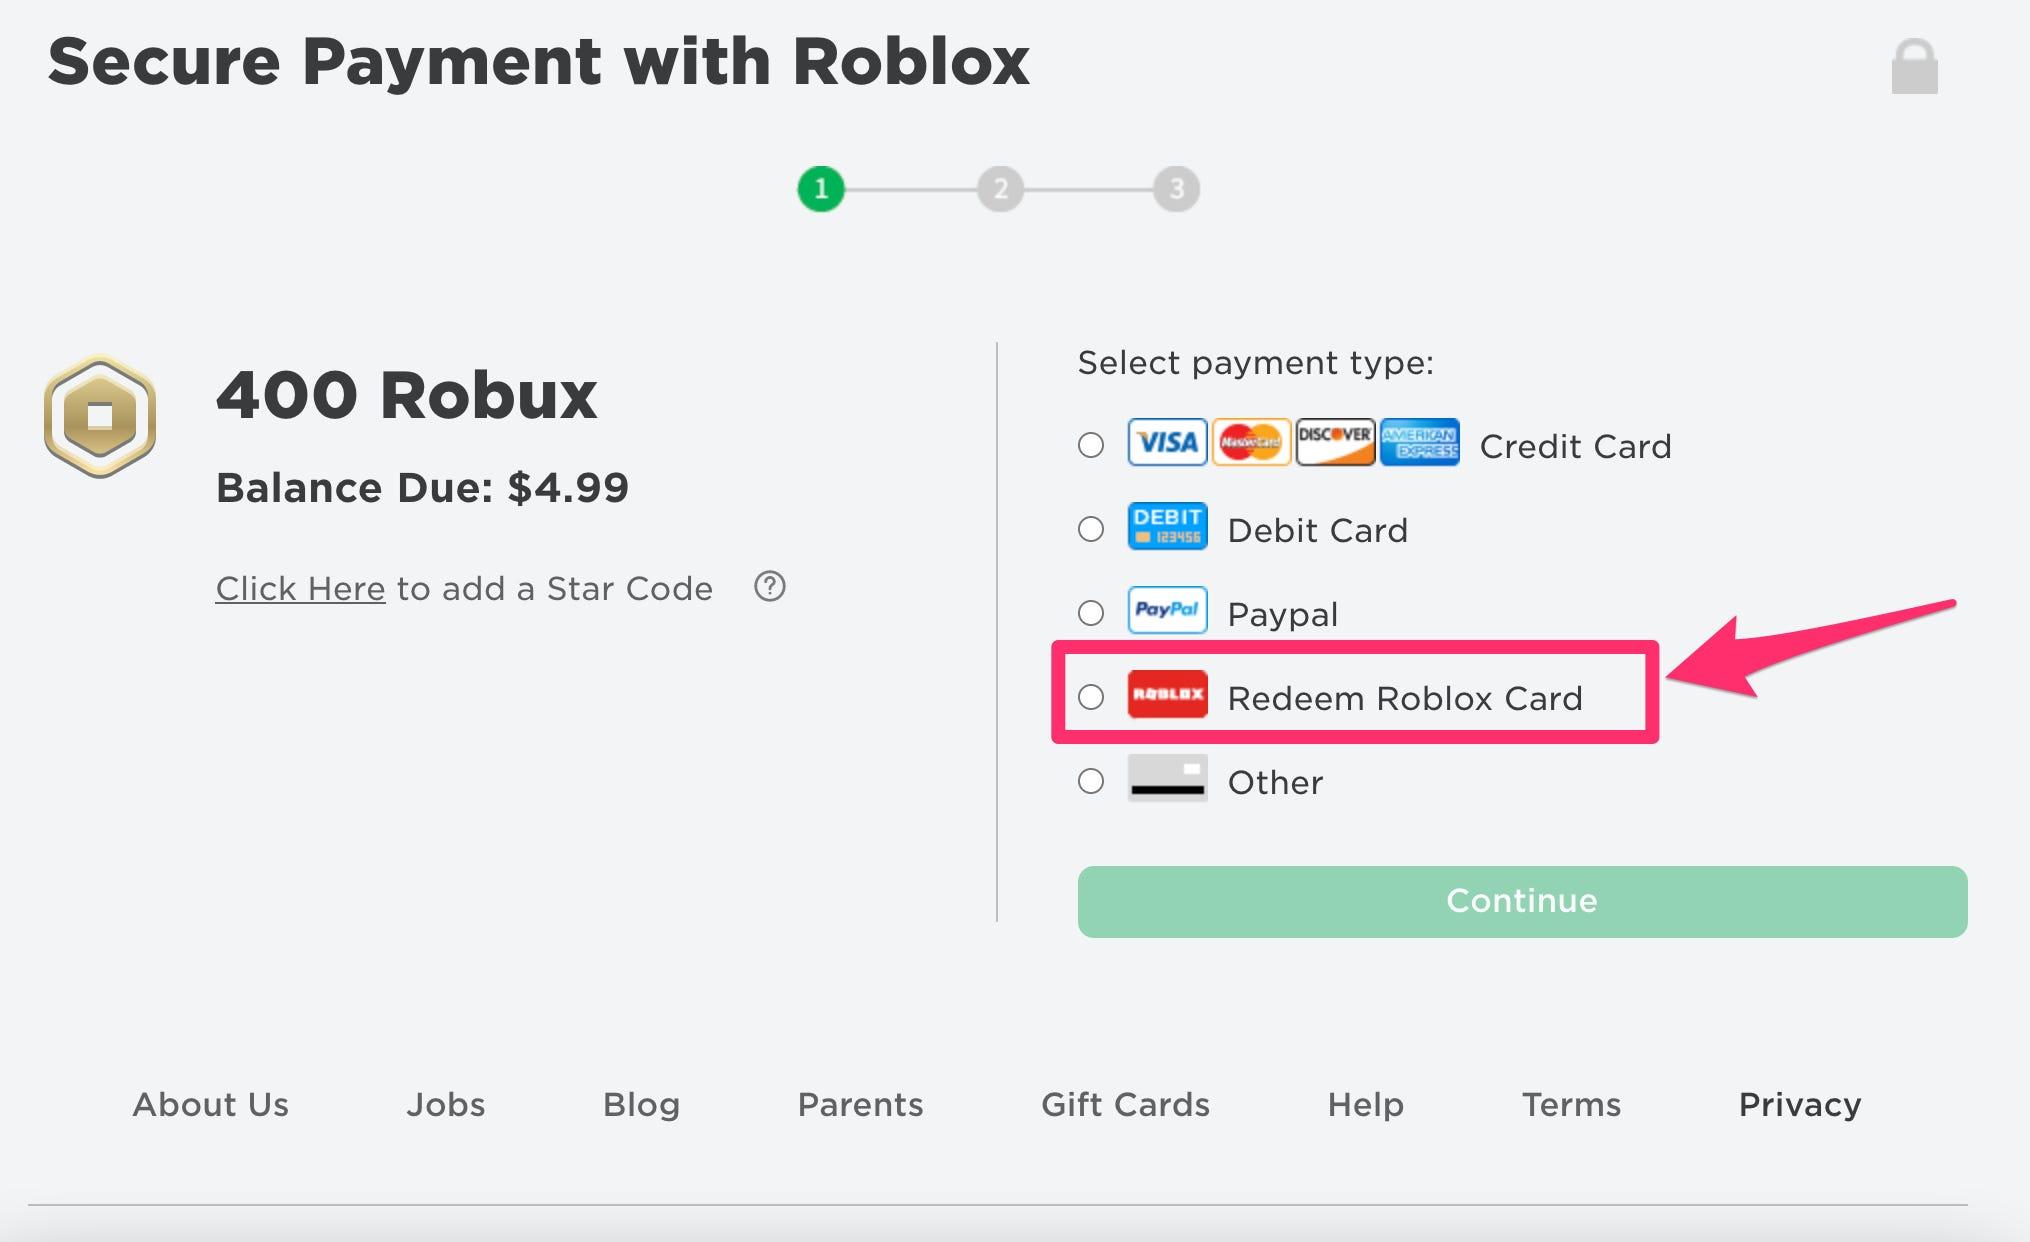 How To Redeem A Roblox Gift Card In 2 Different Ways So You Can Buy In Game Accessories And Upgrades Business Insider Africa - 400 robux roblox en francais rapide